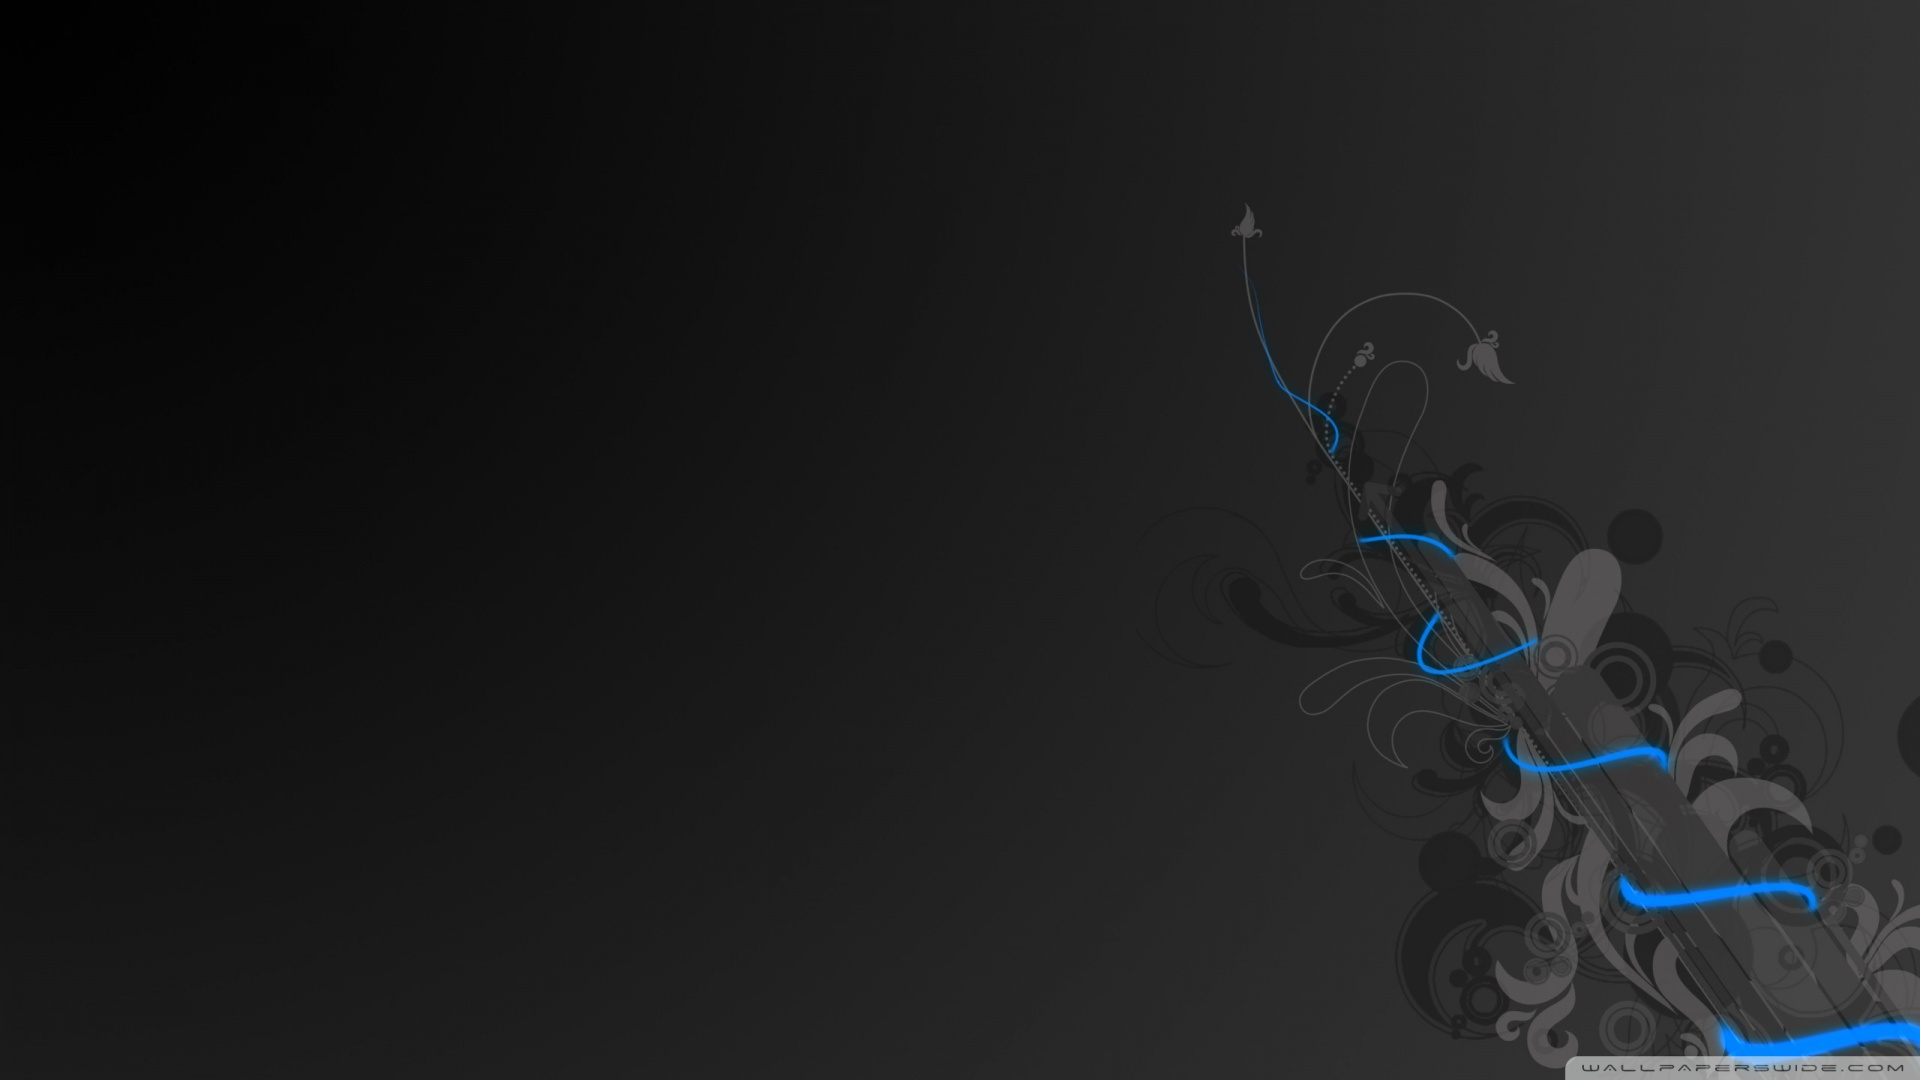 Black Abstract Graphics Wallpaper 1920x1080 Black Abstract Graphics 1920x1080